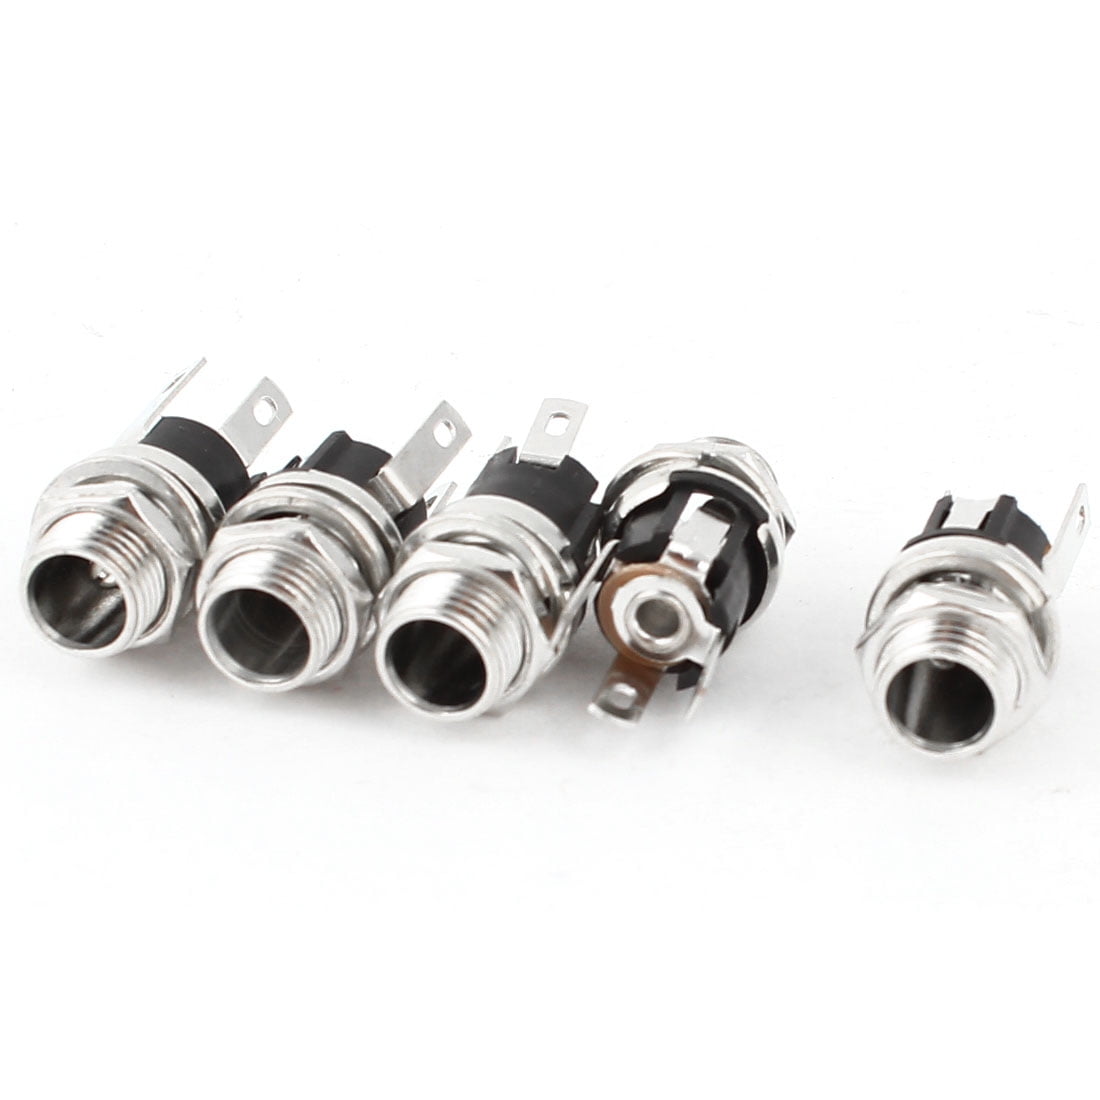 SMALL 5PCS 2.1MM X 5.5MM PANEL CHASSIS MOUNT DC SOCKET CHARGER POWER JACK PLUG 